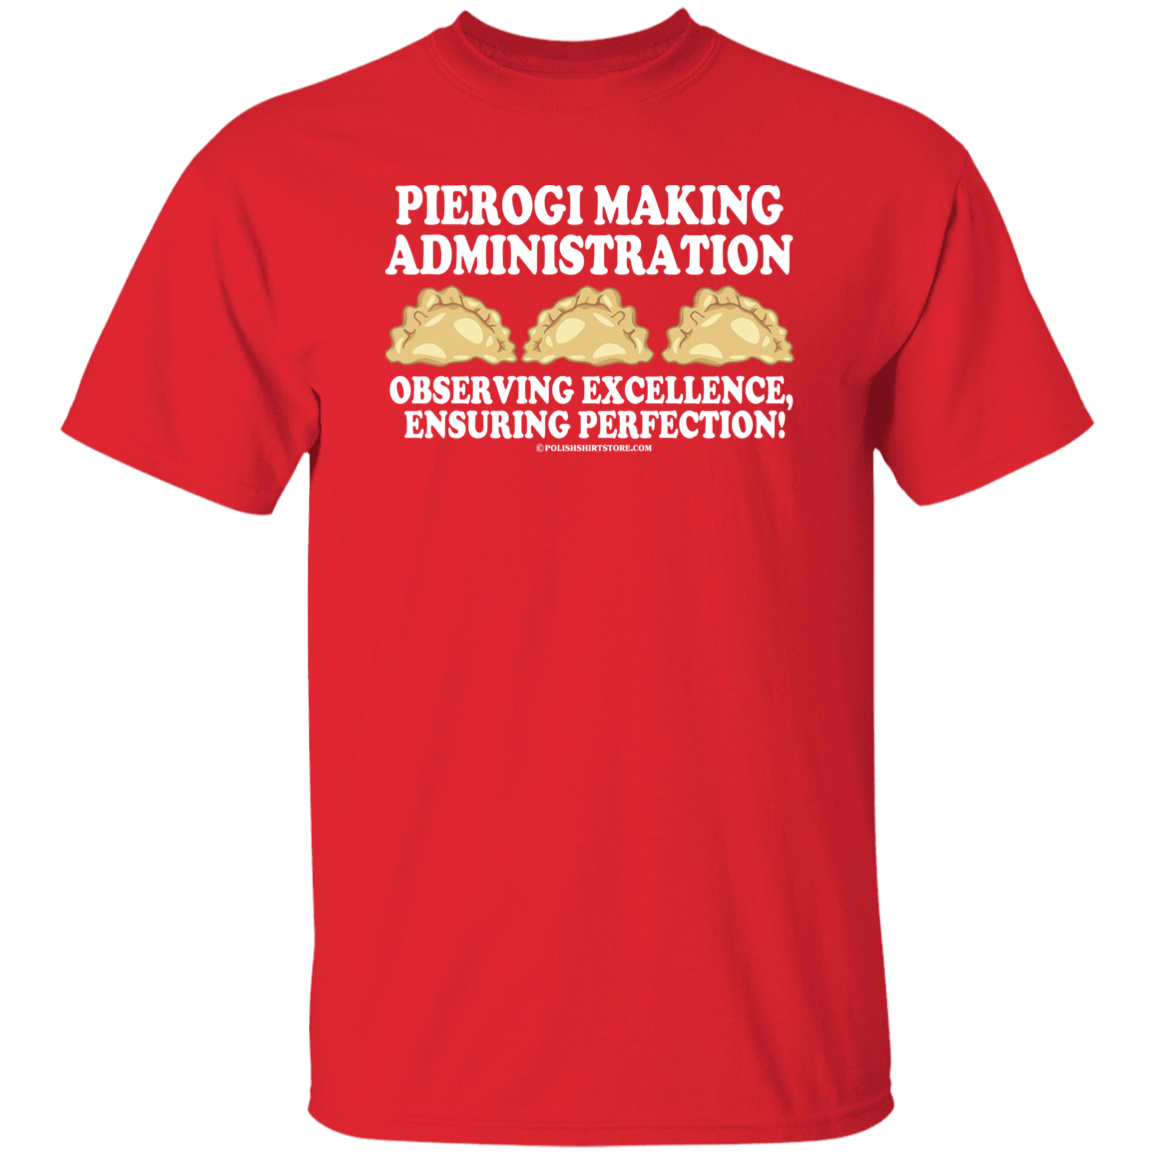 Pierogi Making Administration Observing Excellence Ensuring Perfection Apparel CustomCat G500 5.3 oz. T-Shirt Red S